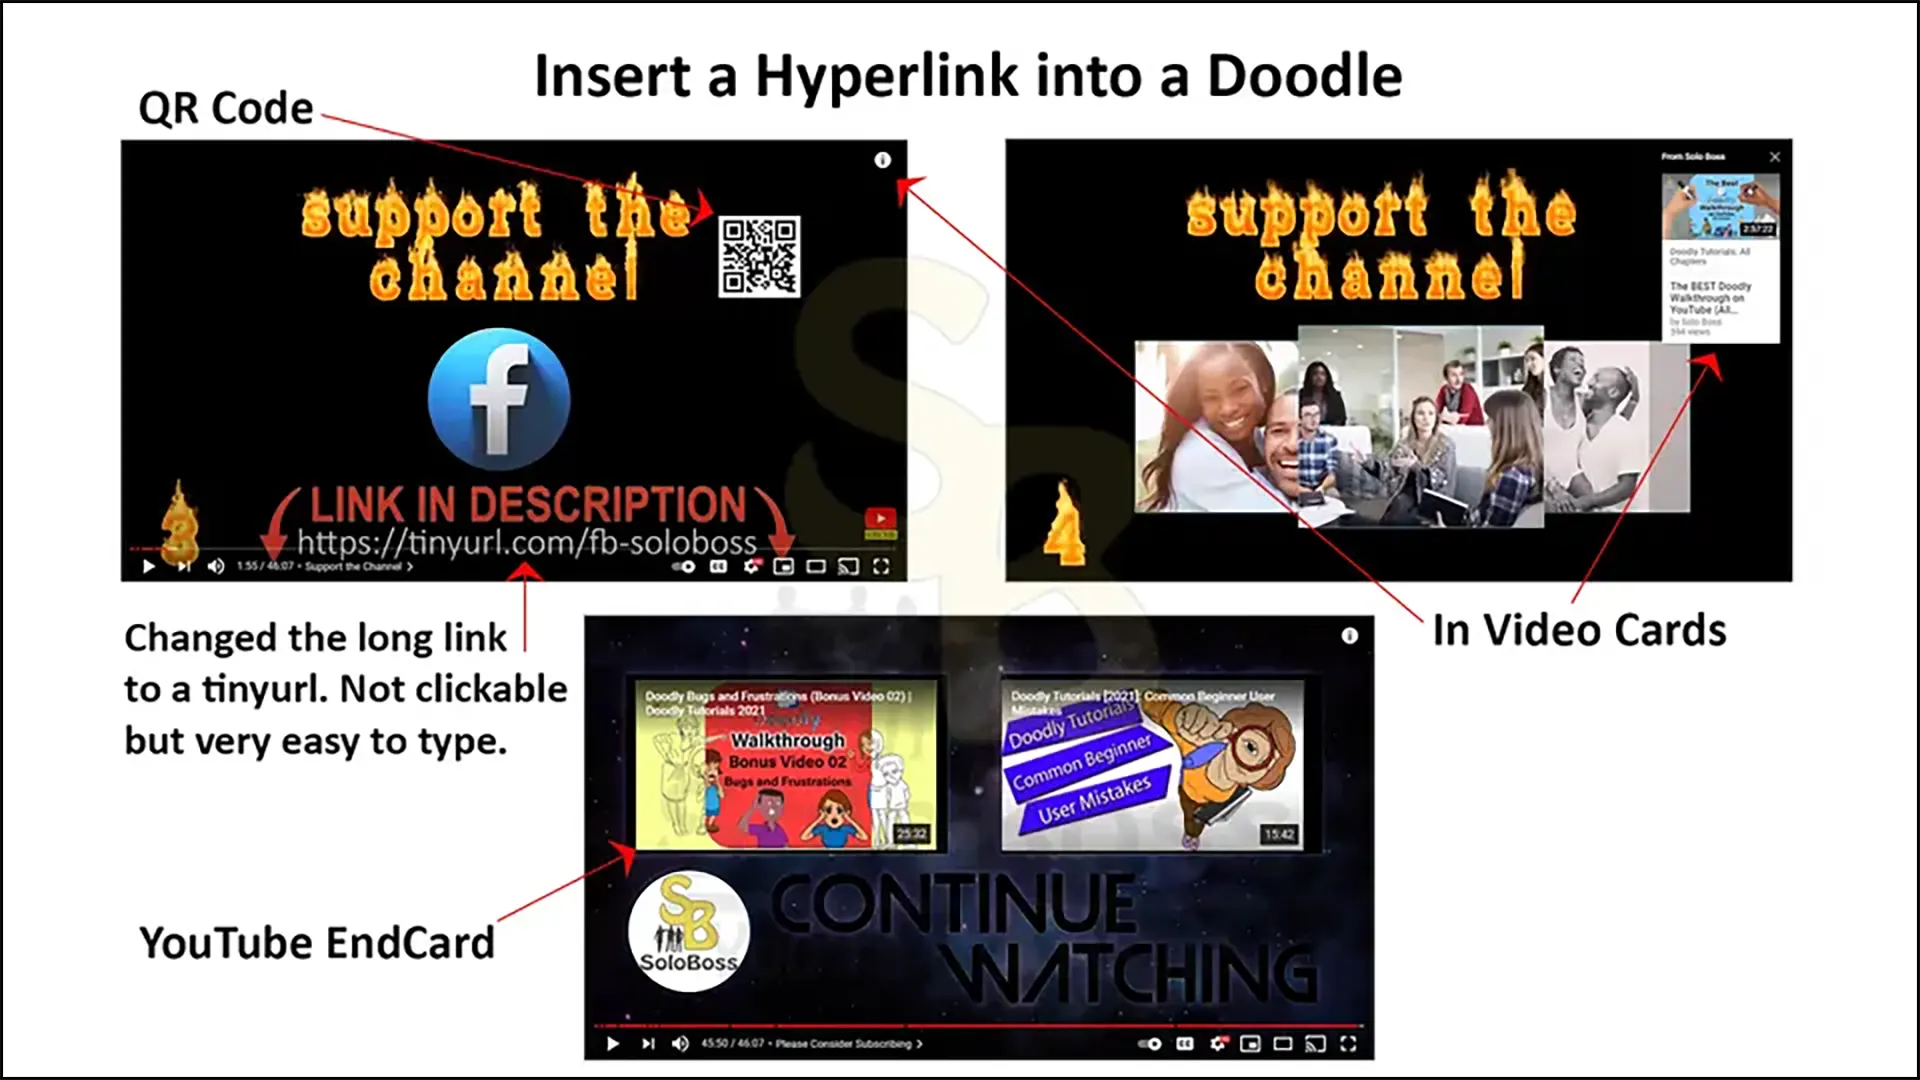 Displays the various methods of inserting a hyperlink into a YouTube video.